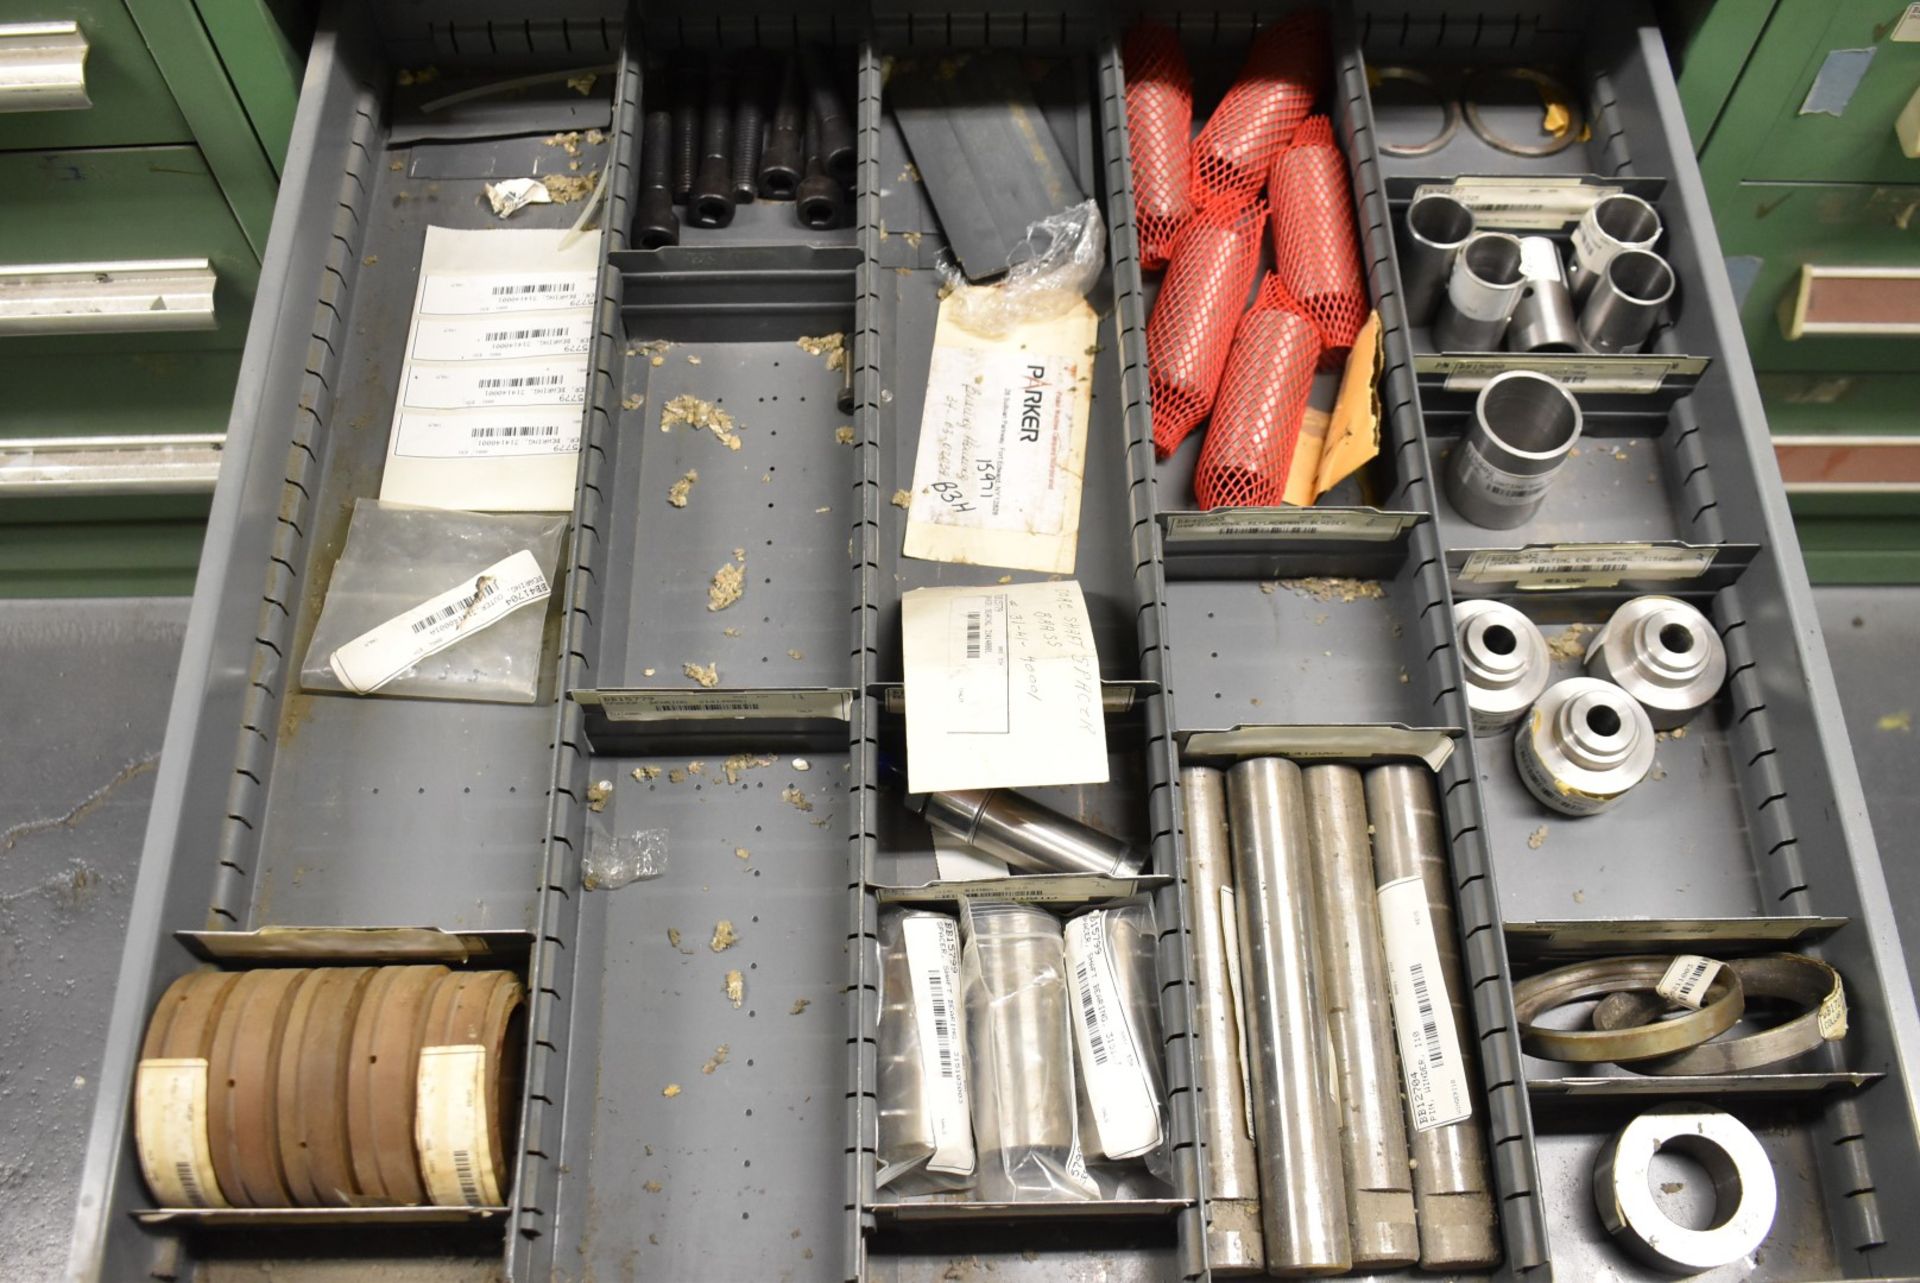 LOT/ CONTENTS OF CABINET - INCLUDING BALL INSERTS, BRONZE BUSHINGS, WASHERS, SPANNER NUTS, - Image 7 of 9